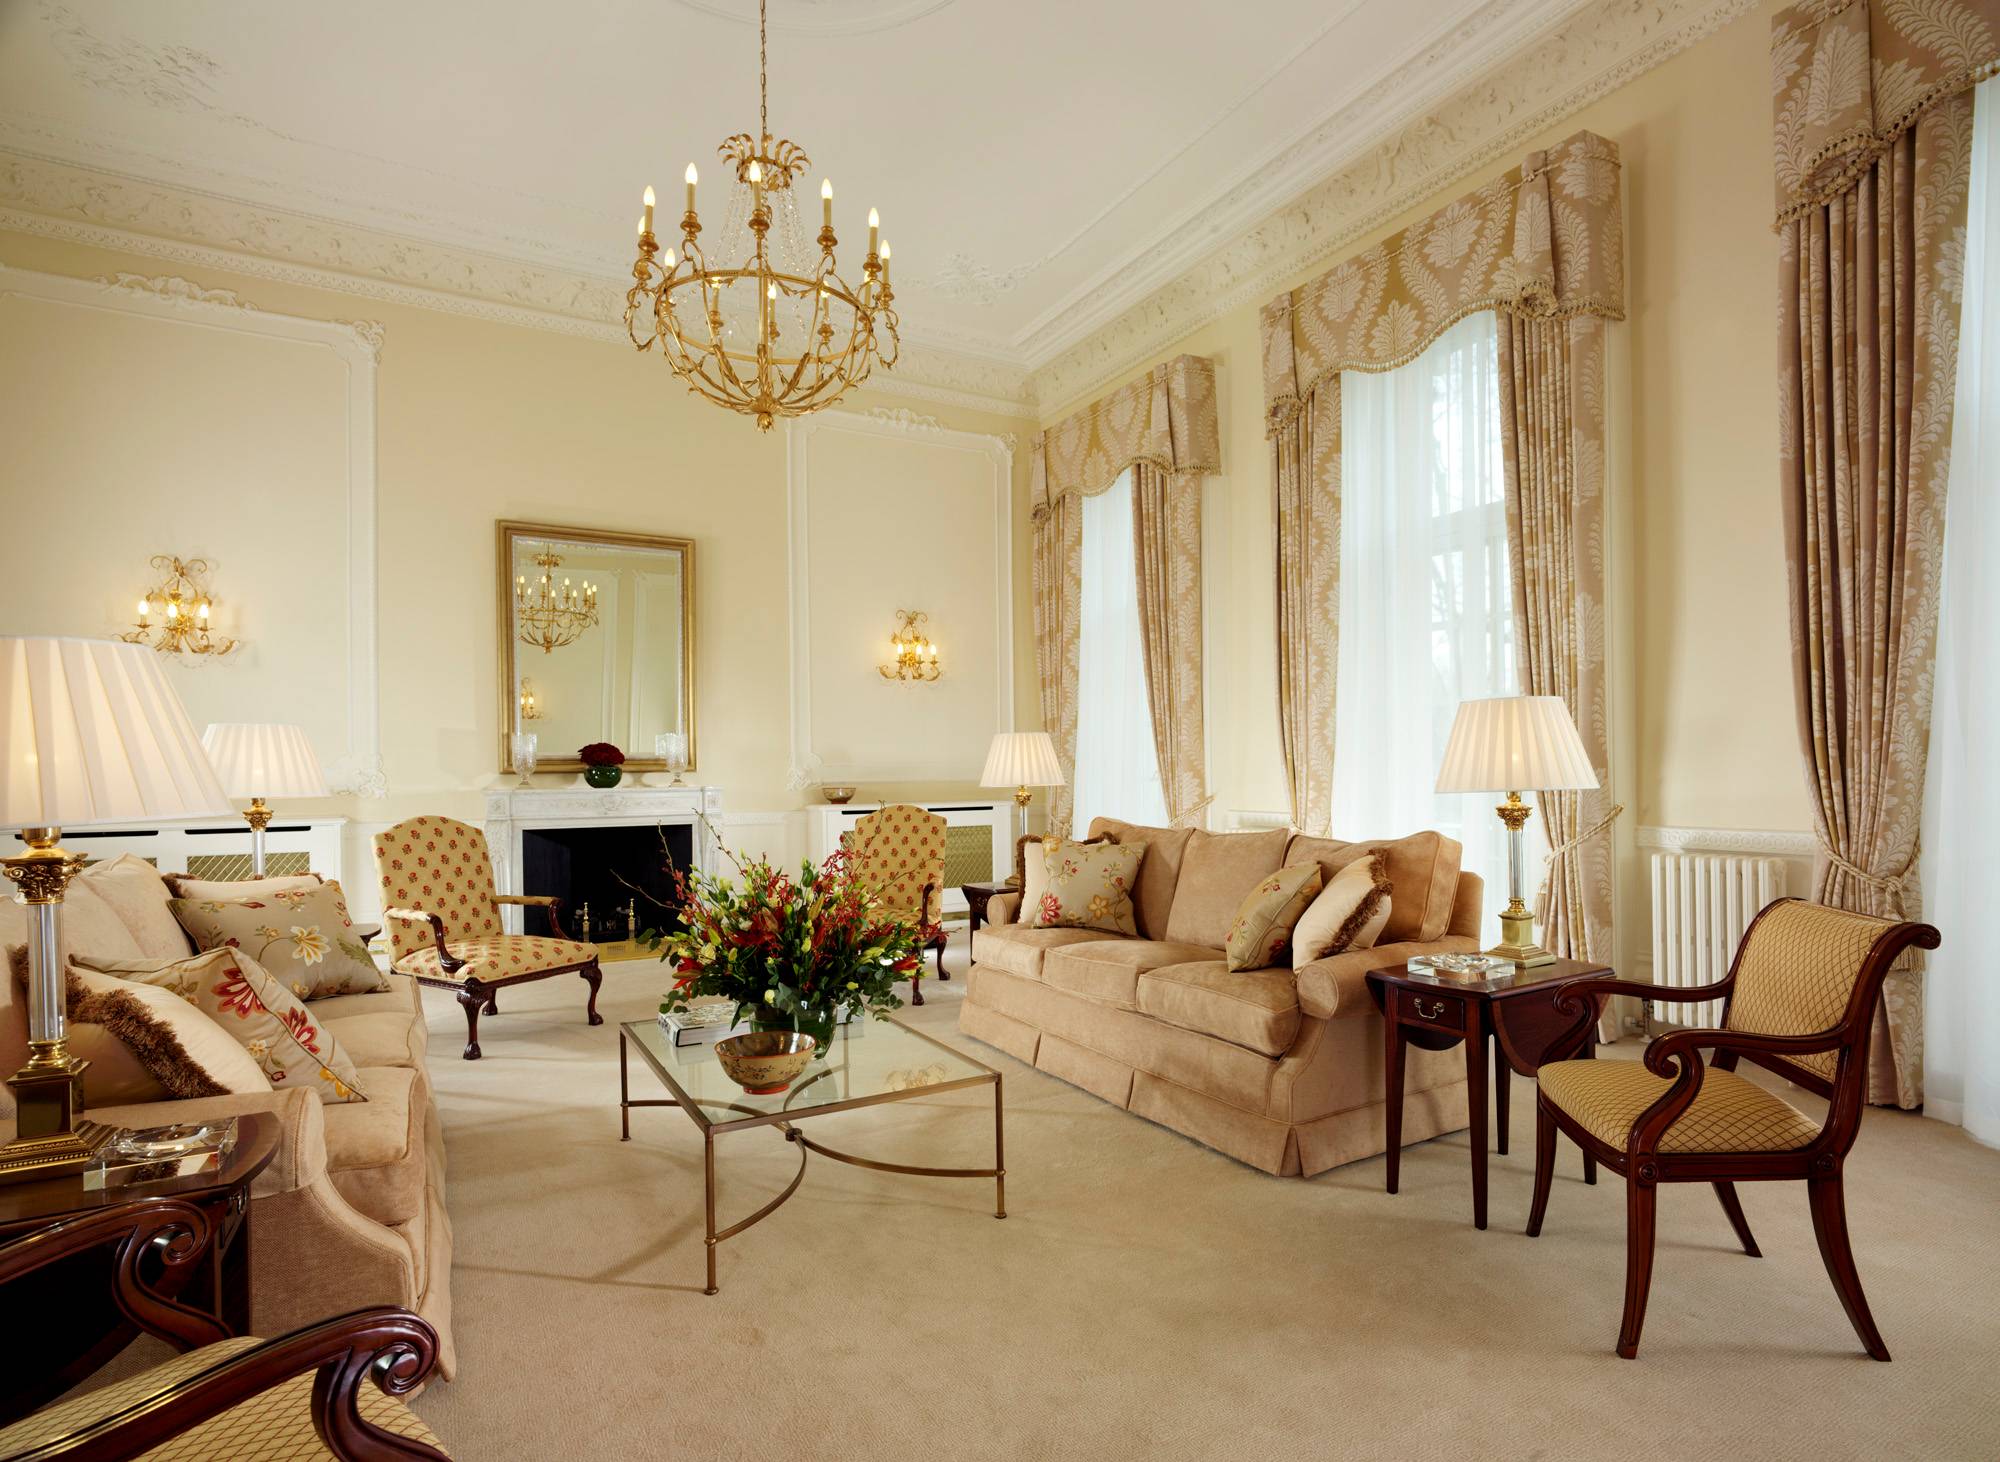 Three-Bedroom Serviced Apartment in a Palatial Kensington Residence